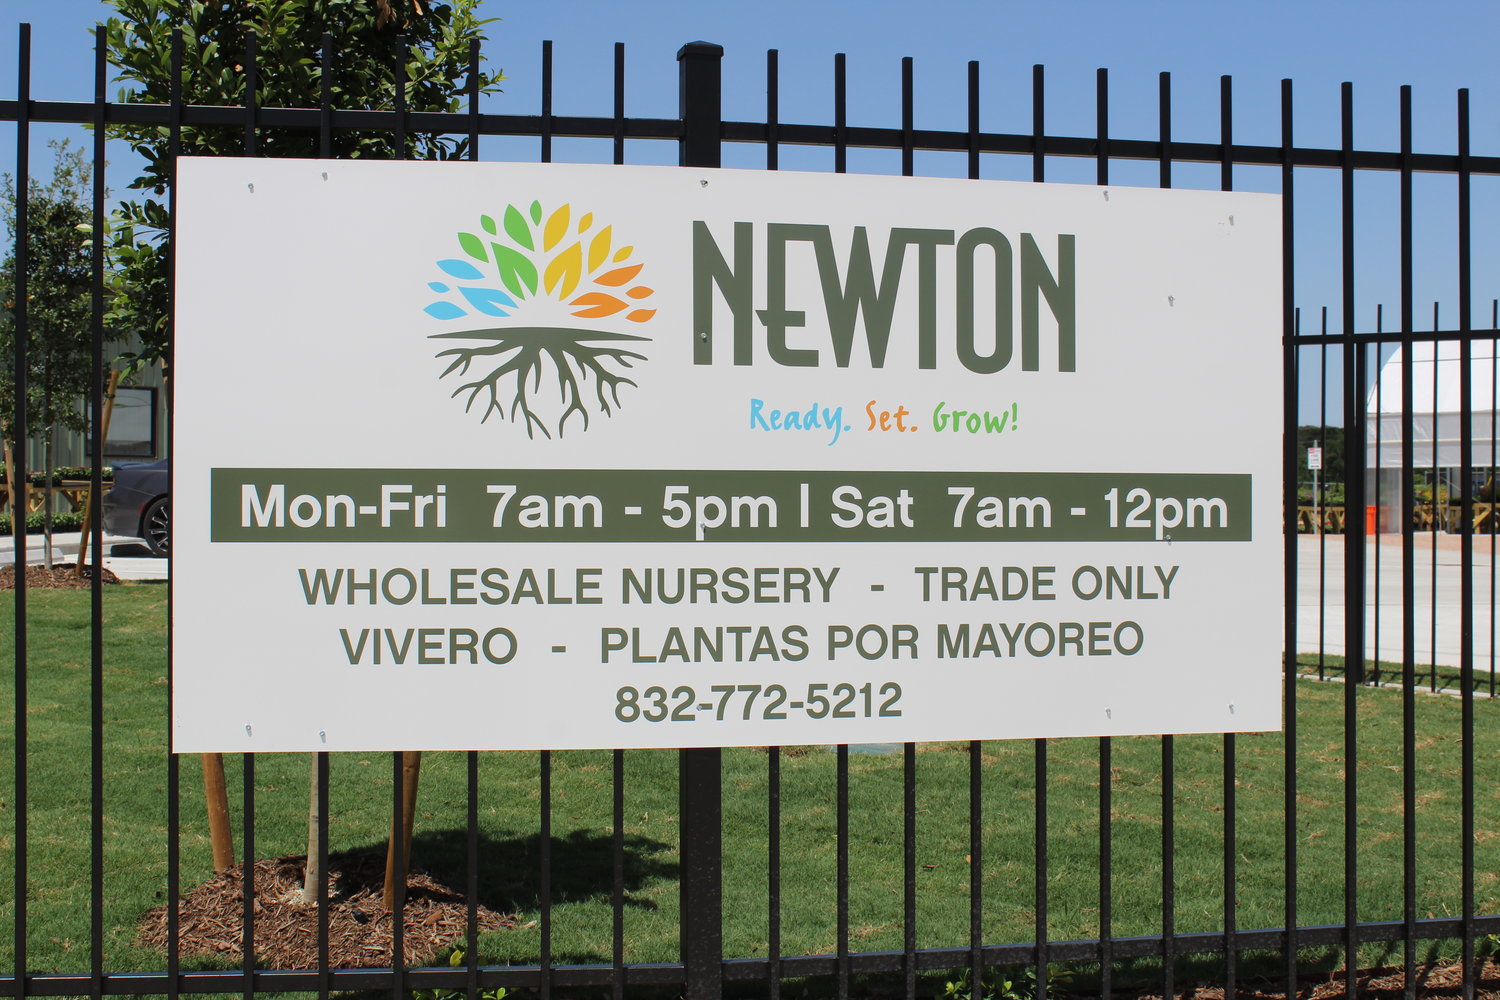 Newton Nursery opened for business June 9 near the Bucc-ee’s in Katy. The new gardening spot is set up to help people find what they need quickly, the nursery’s management said.